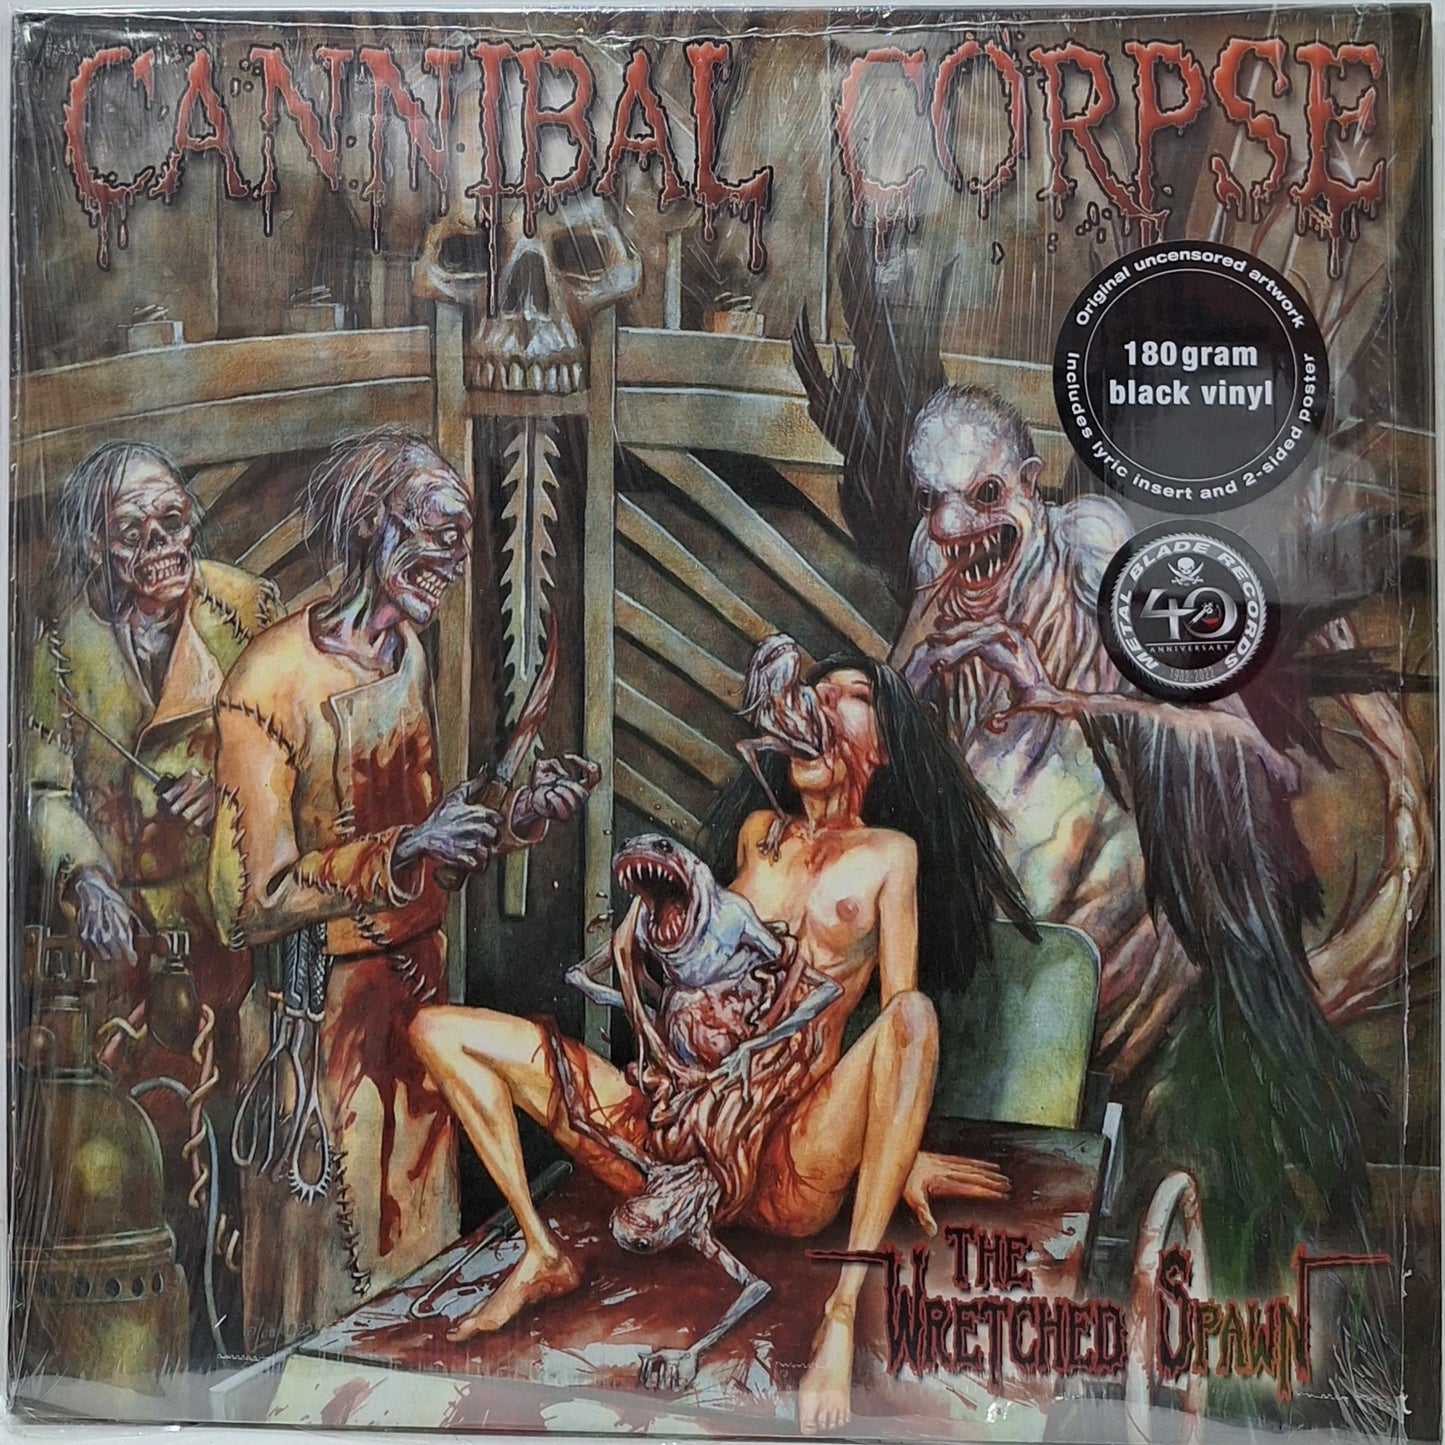 CANNIBAL CORPSE - THE WRETCHED SPAWN  LP